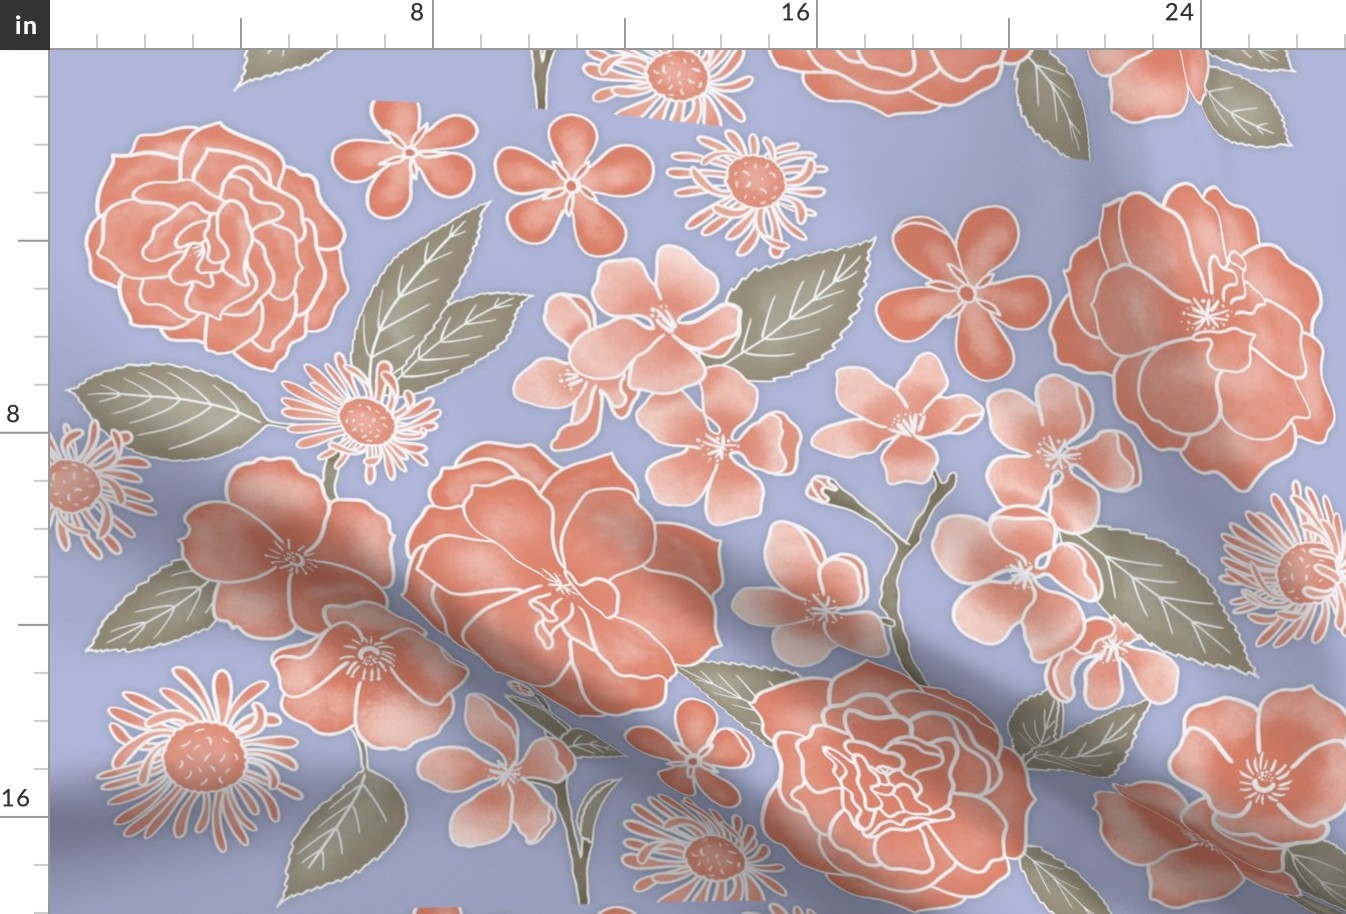 Flowering Blooms in Pantone's Intangible Palette of Dusty Coral, Peach, Sage, and Lilac - Wall Hanging/Tea Towel - Flowercore, Bloomcore, Gift